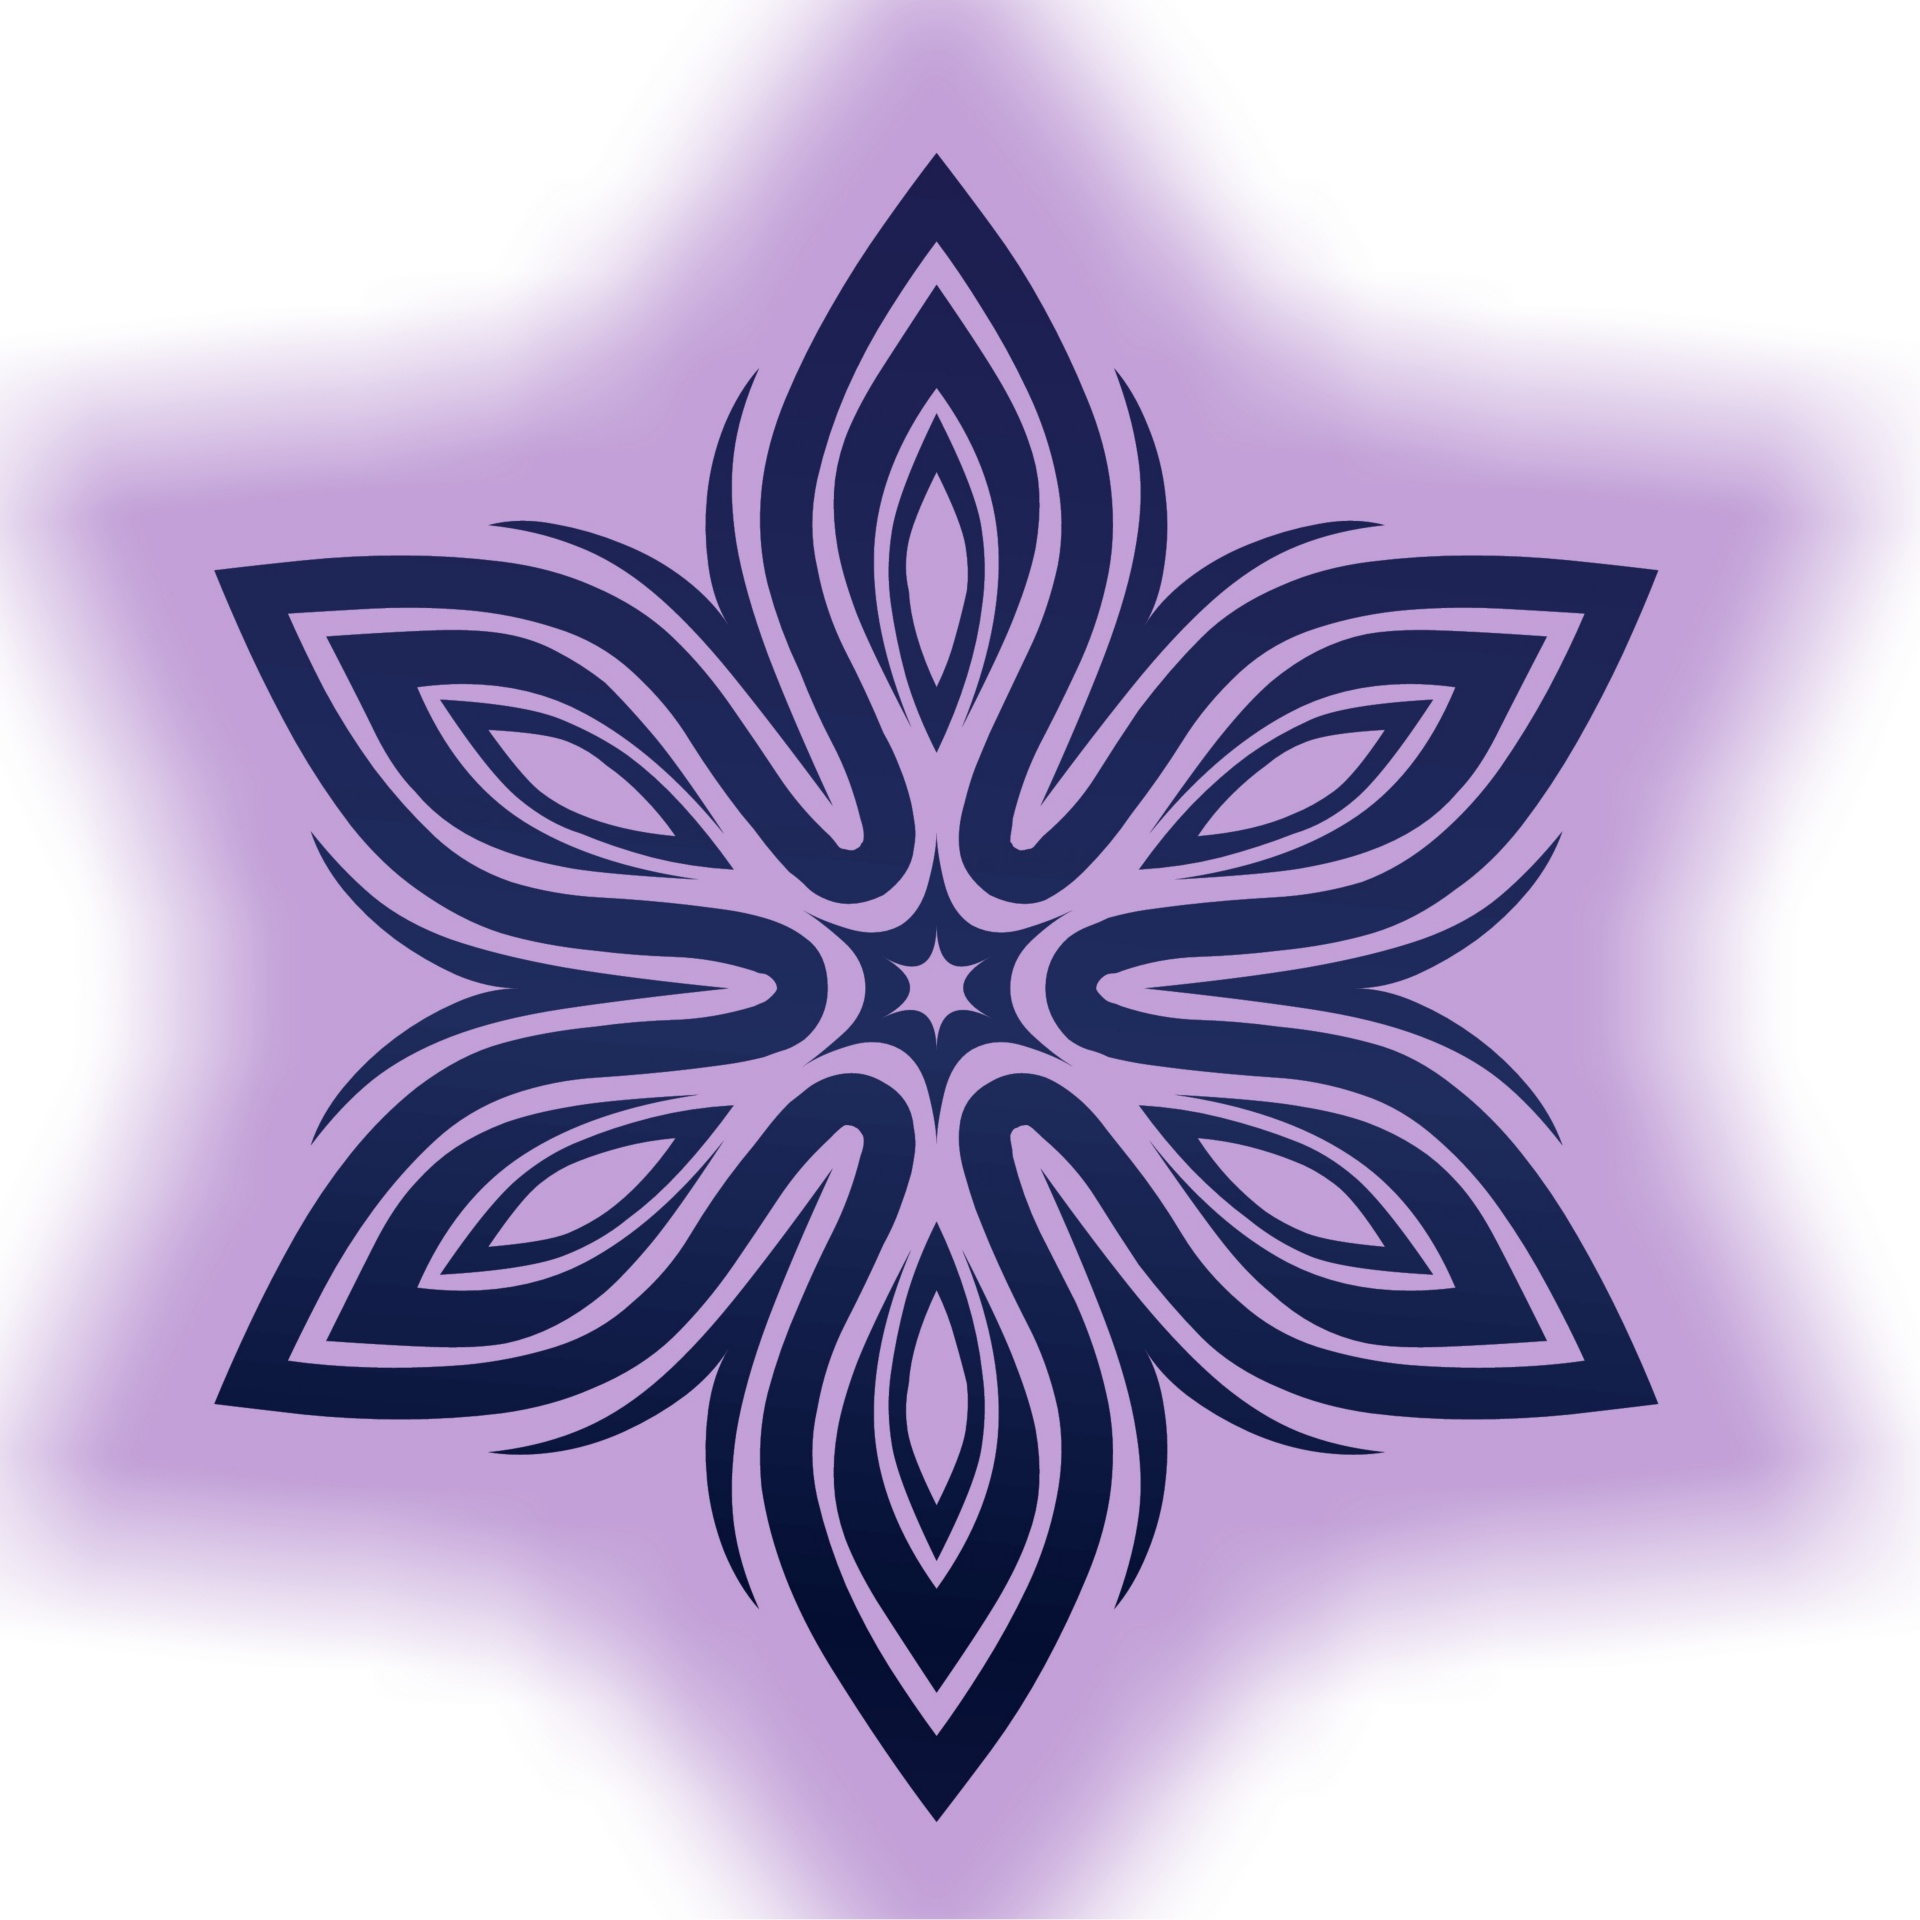 black snowflake with violet glow on white background